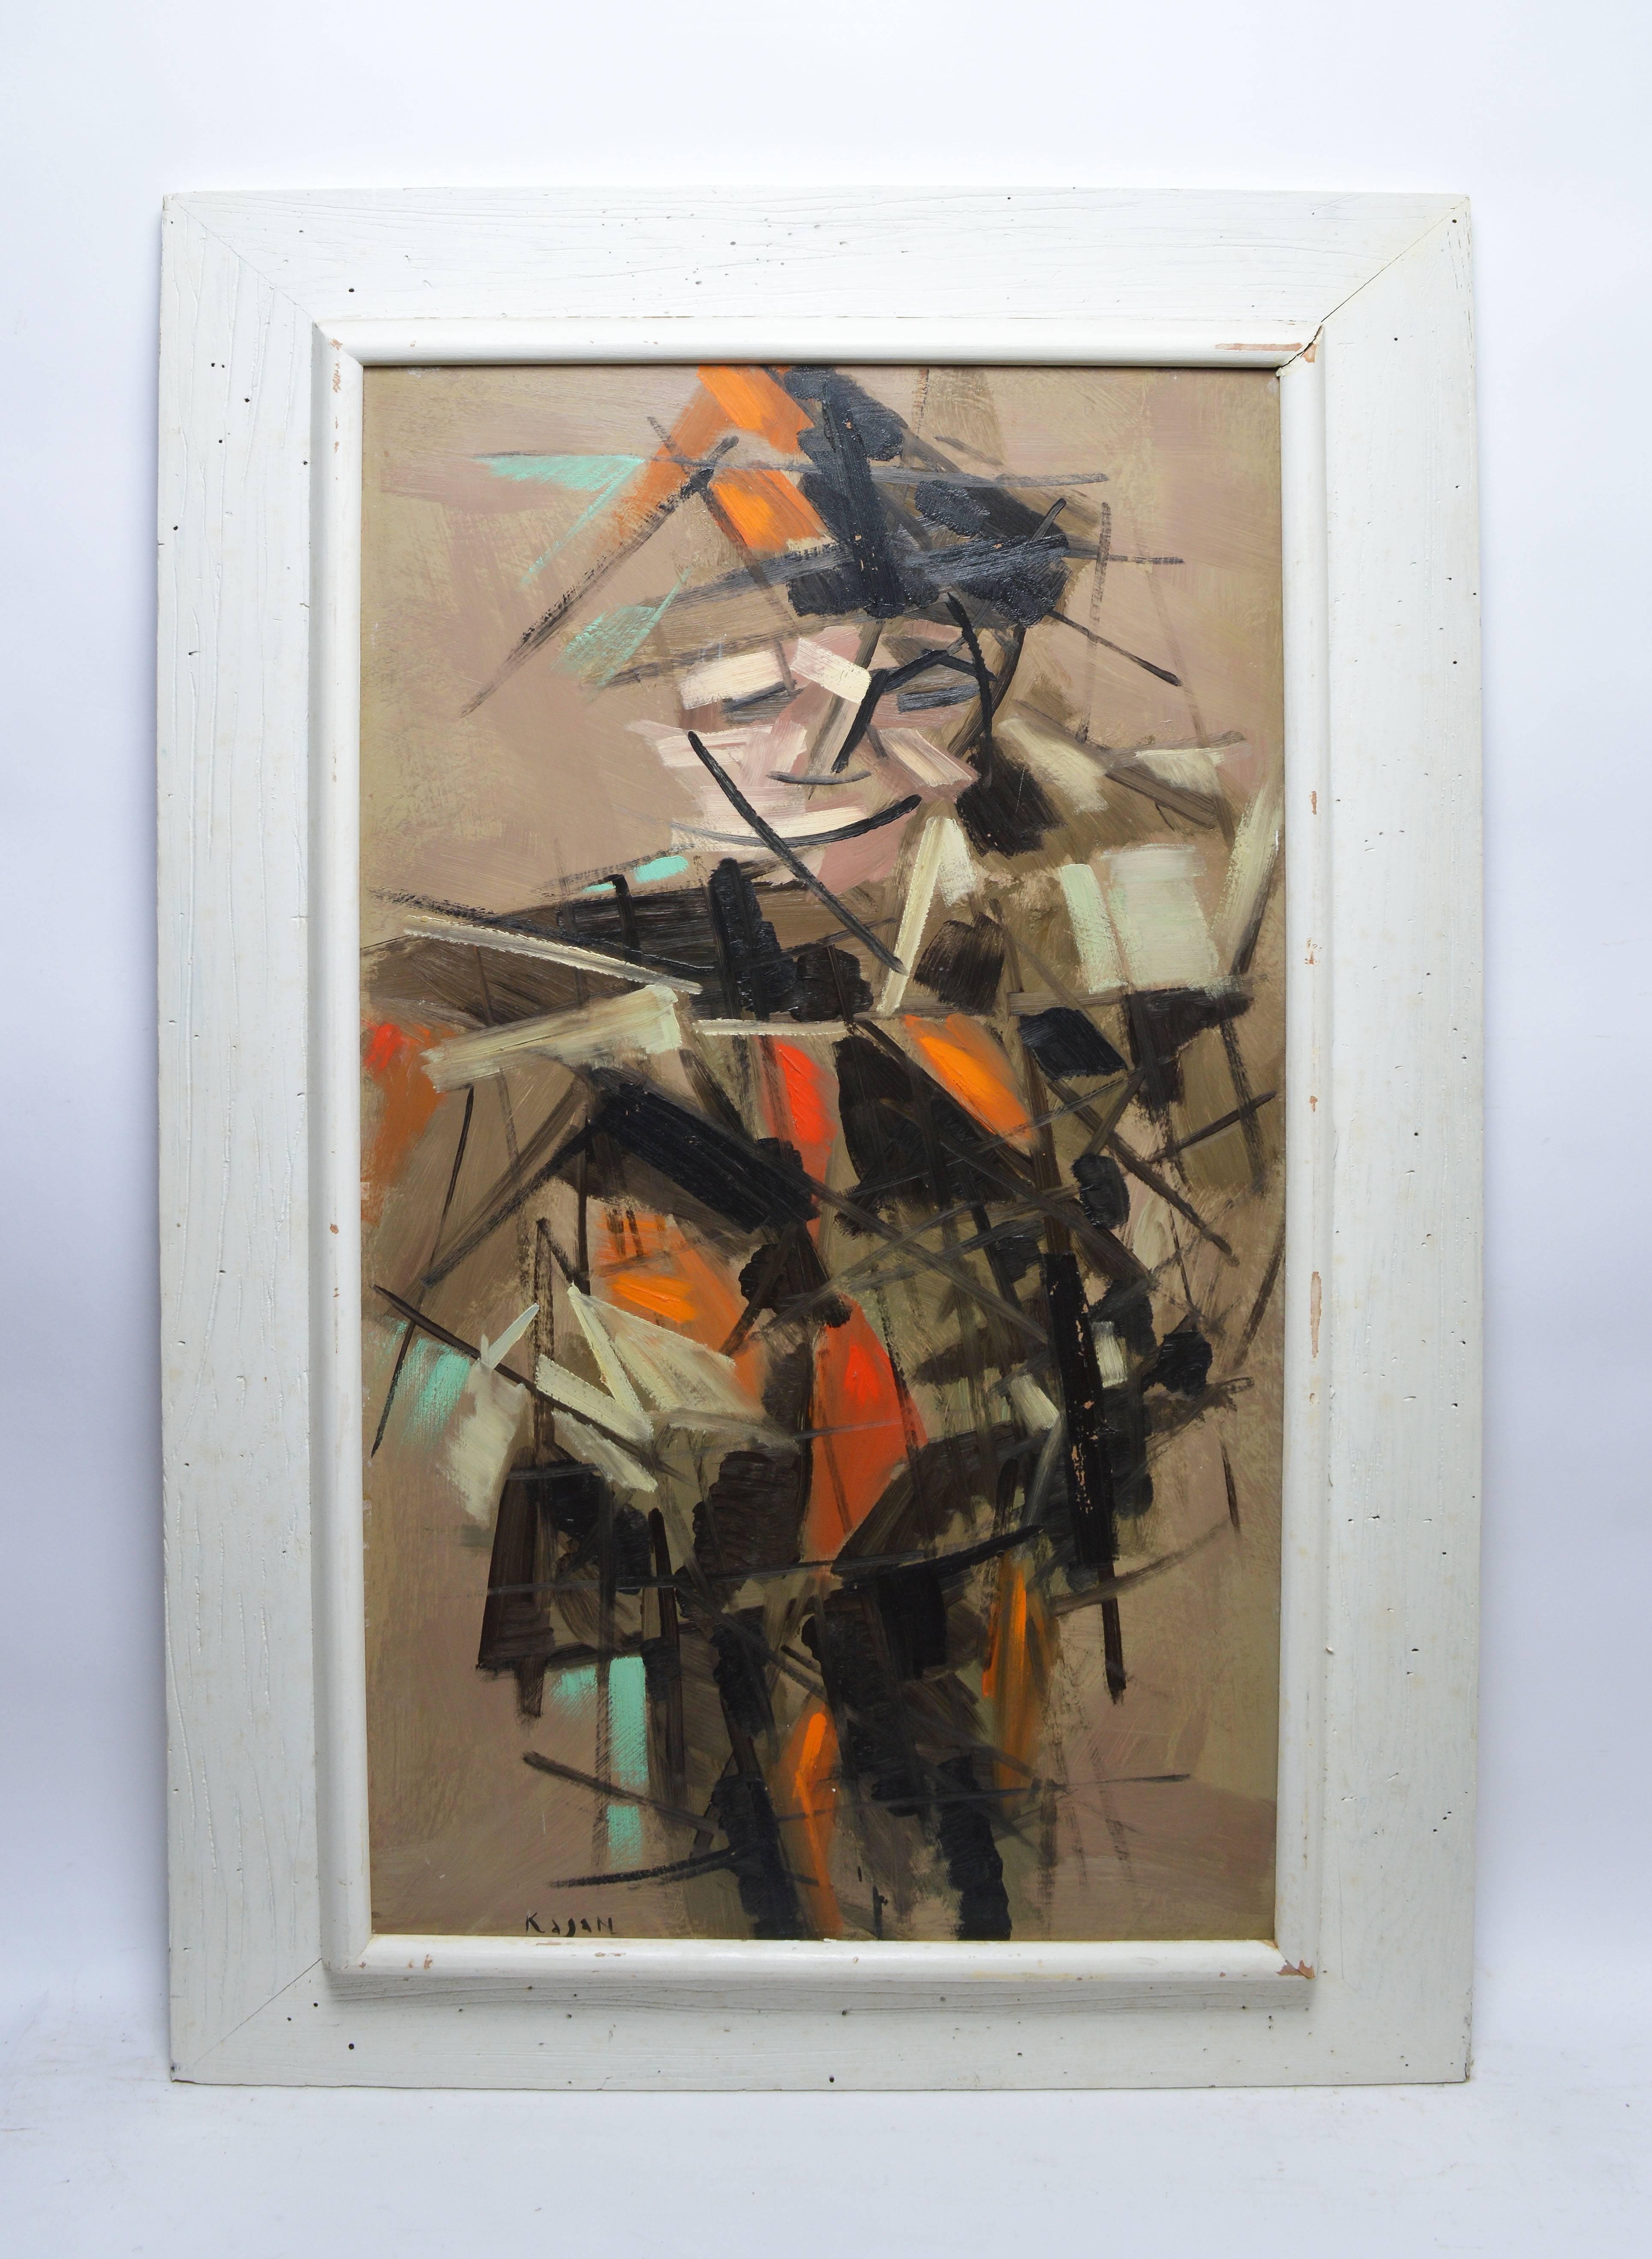 Cubist Figure by Kasan - Painting by Unknown